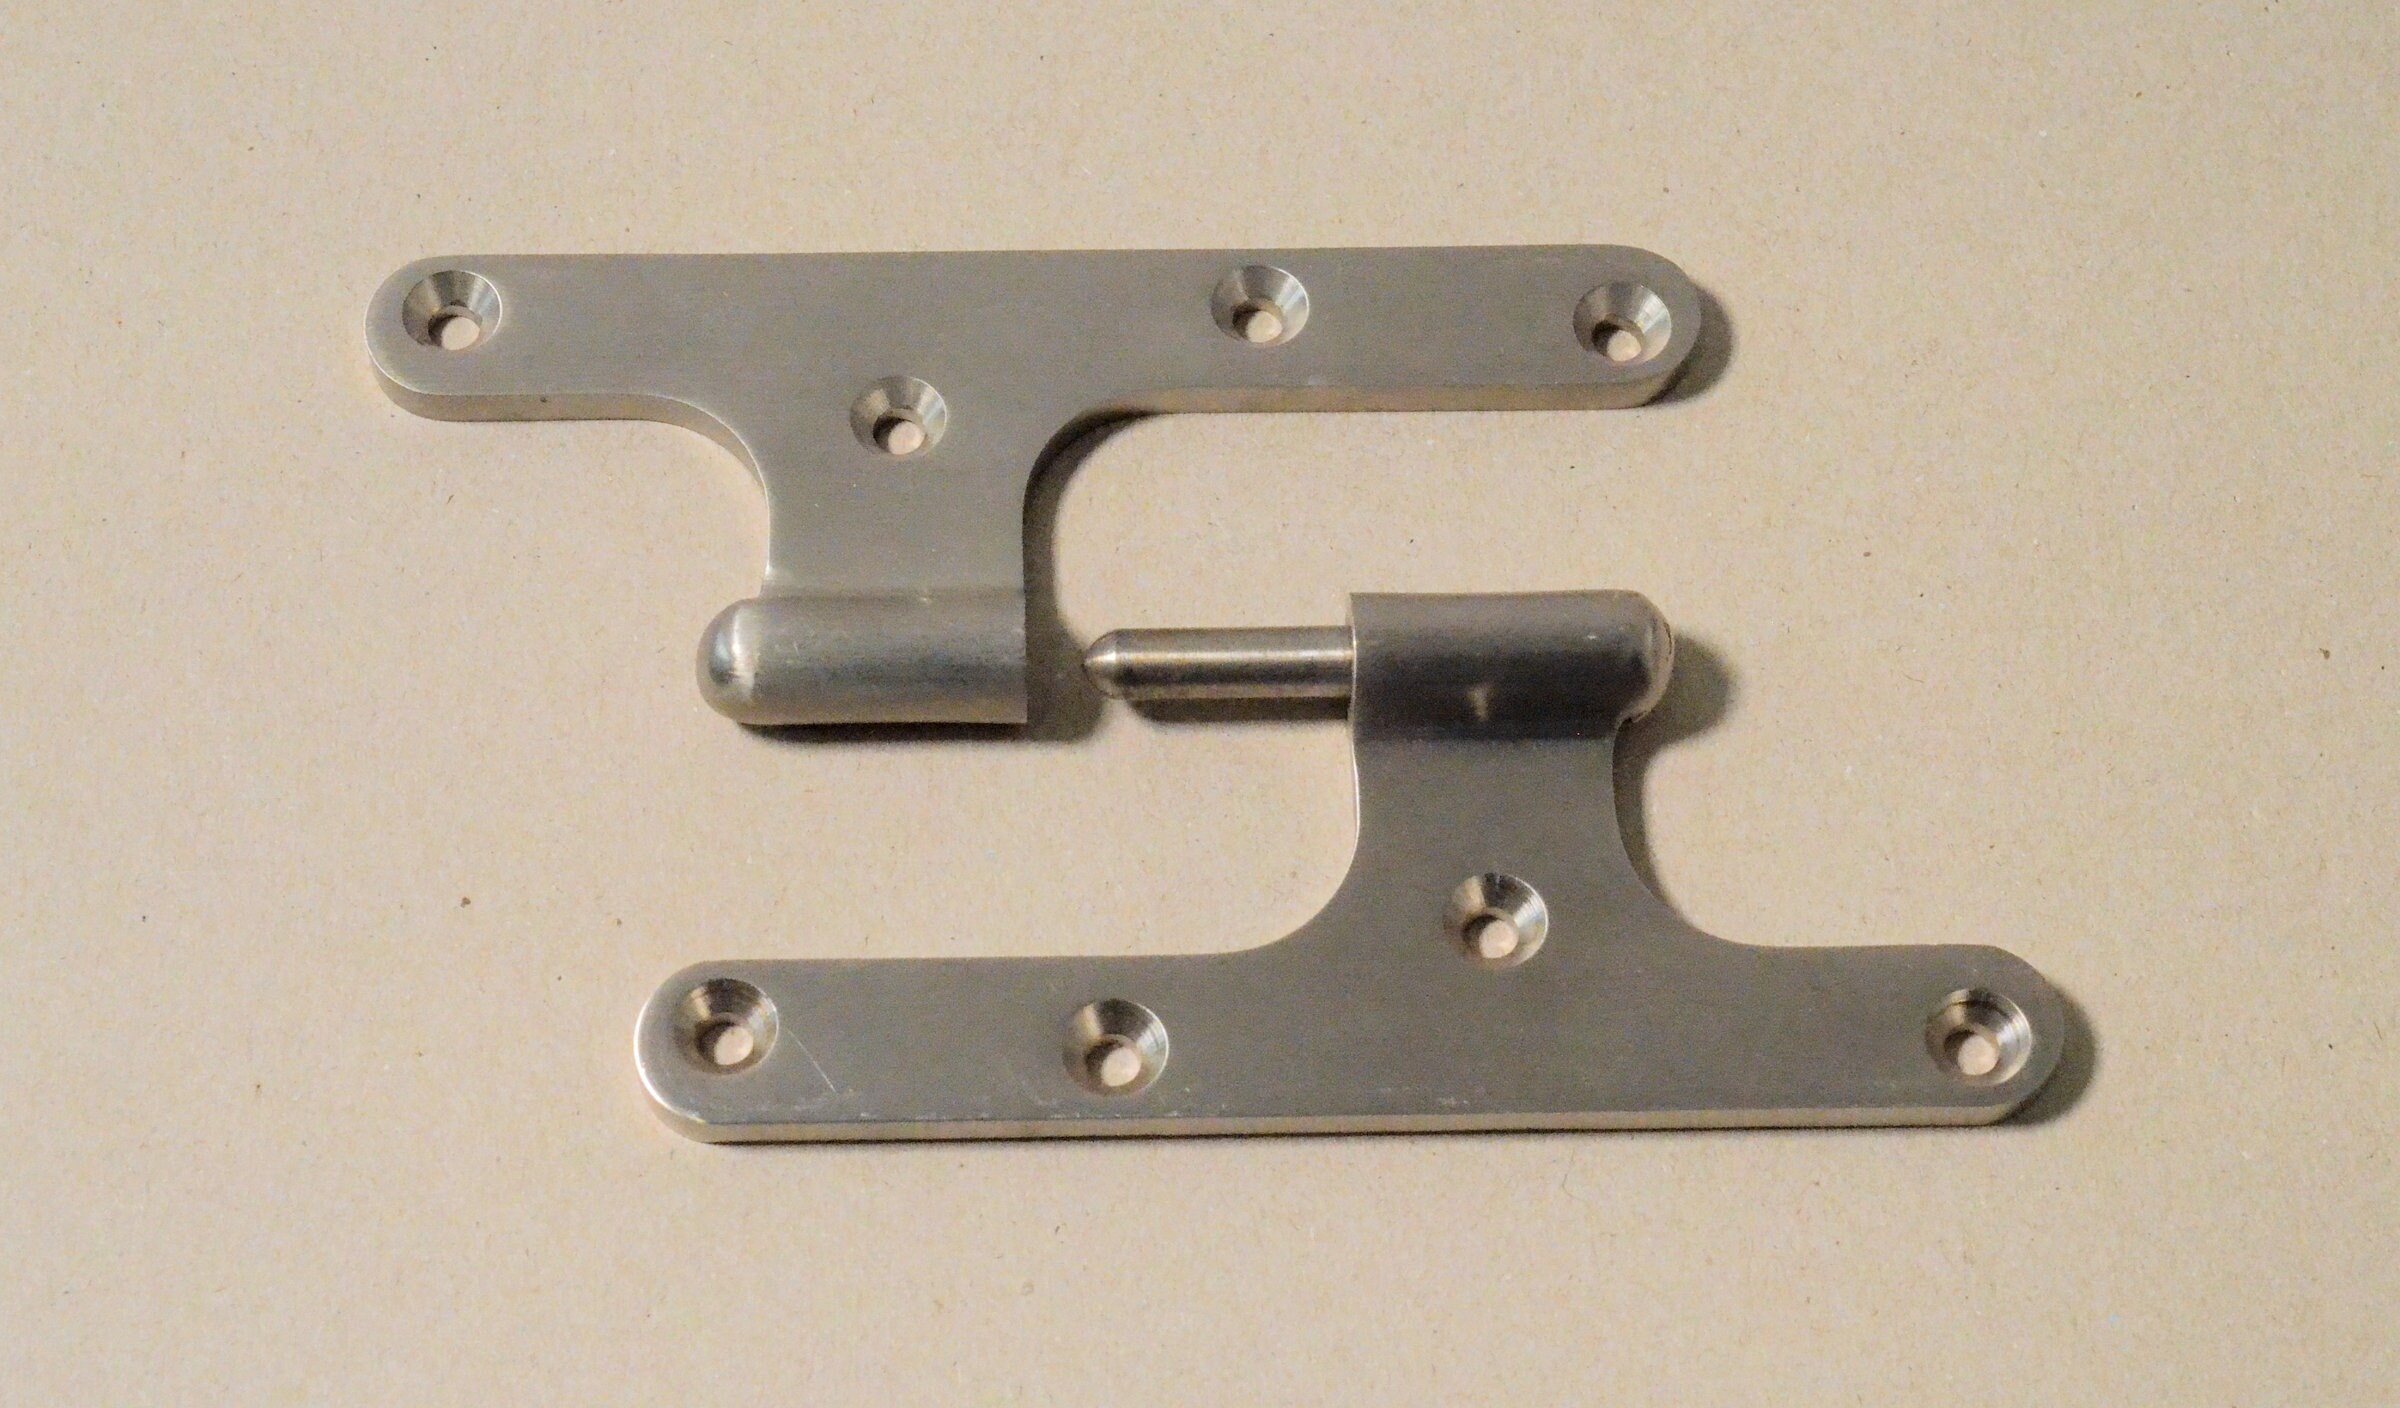 What Are The Common Applications For Pintle Hinges?